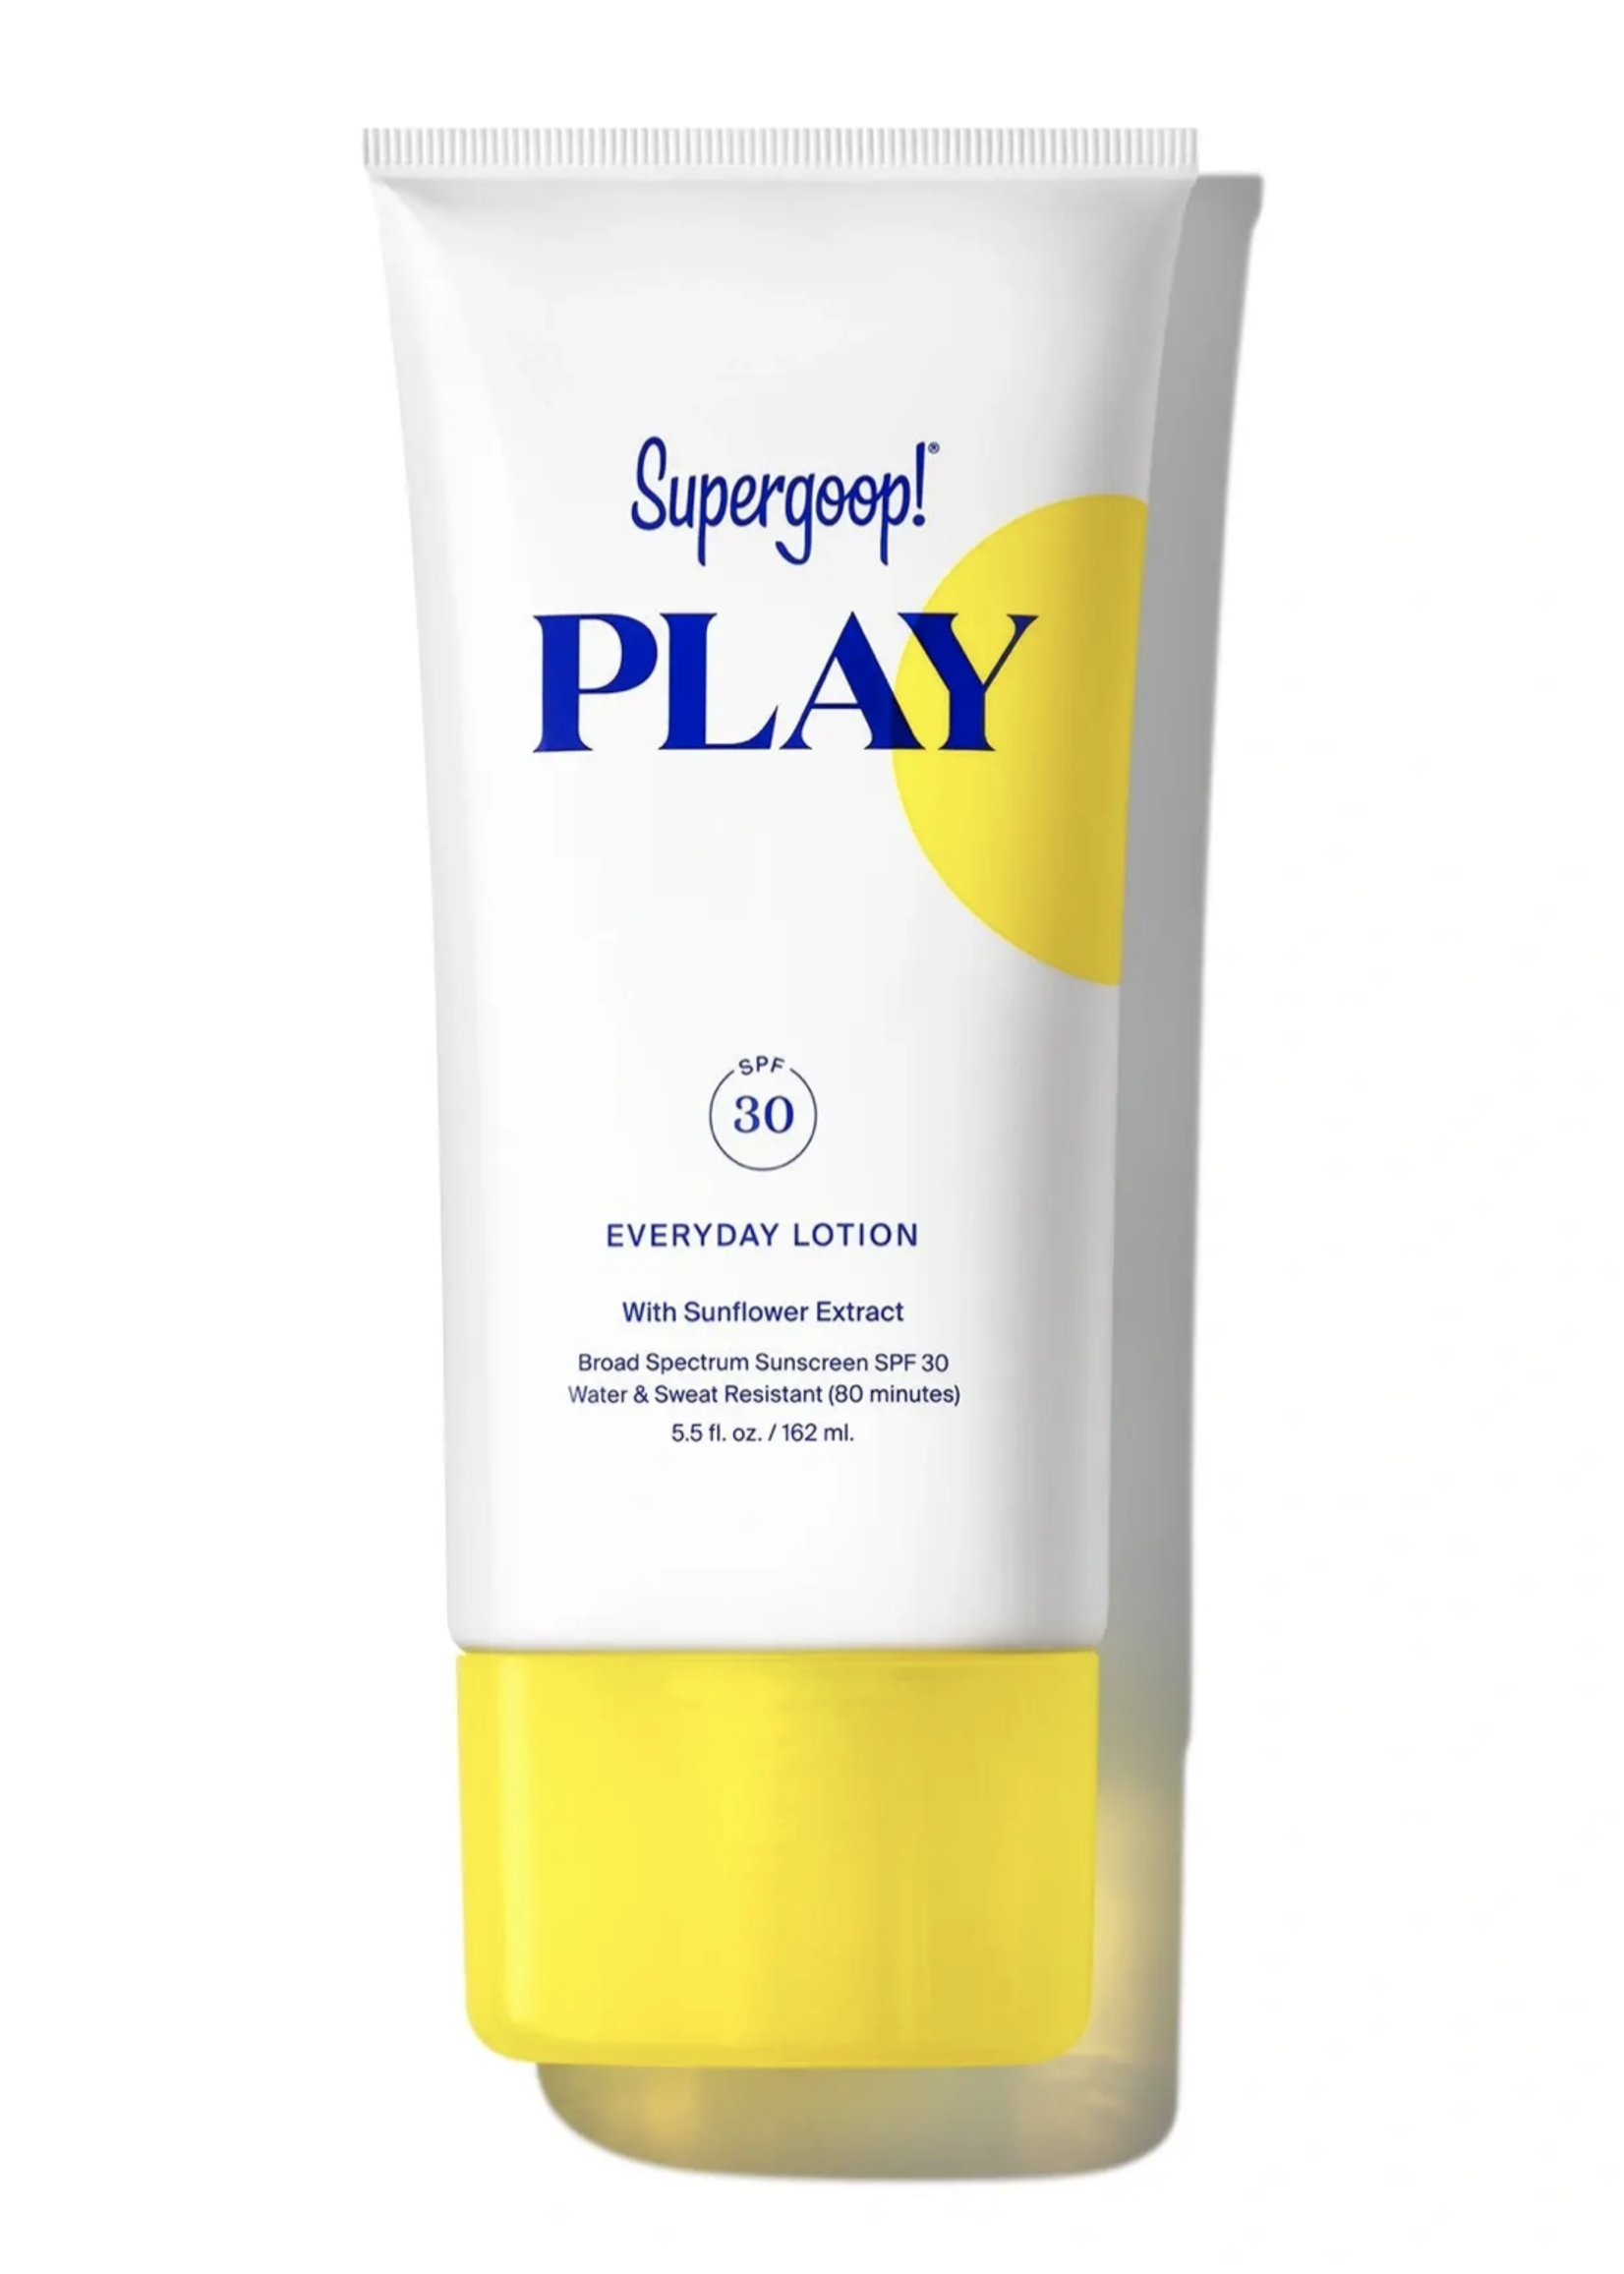 SUPERGOOP PLAY EVERYDAY LOTION SPF30 WITH SUNFLOWER EXTRACT